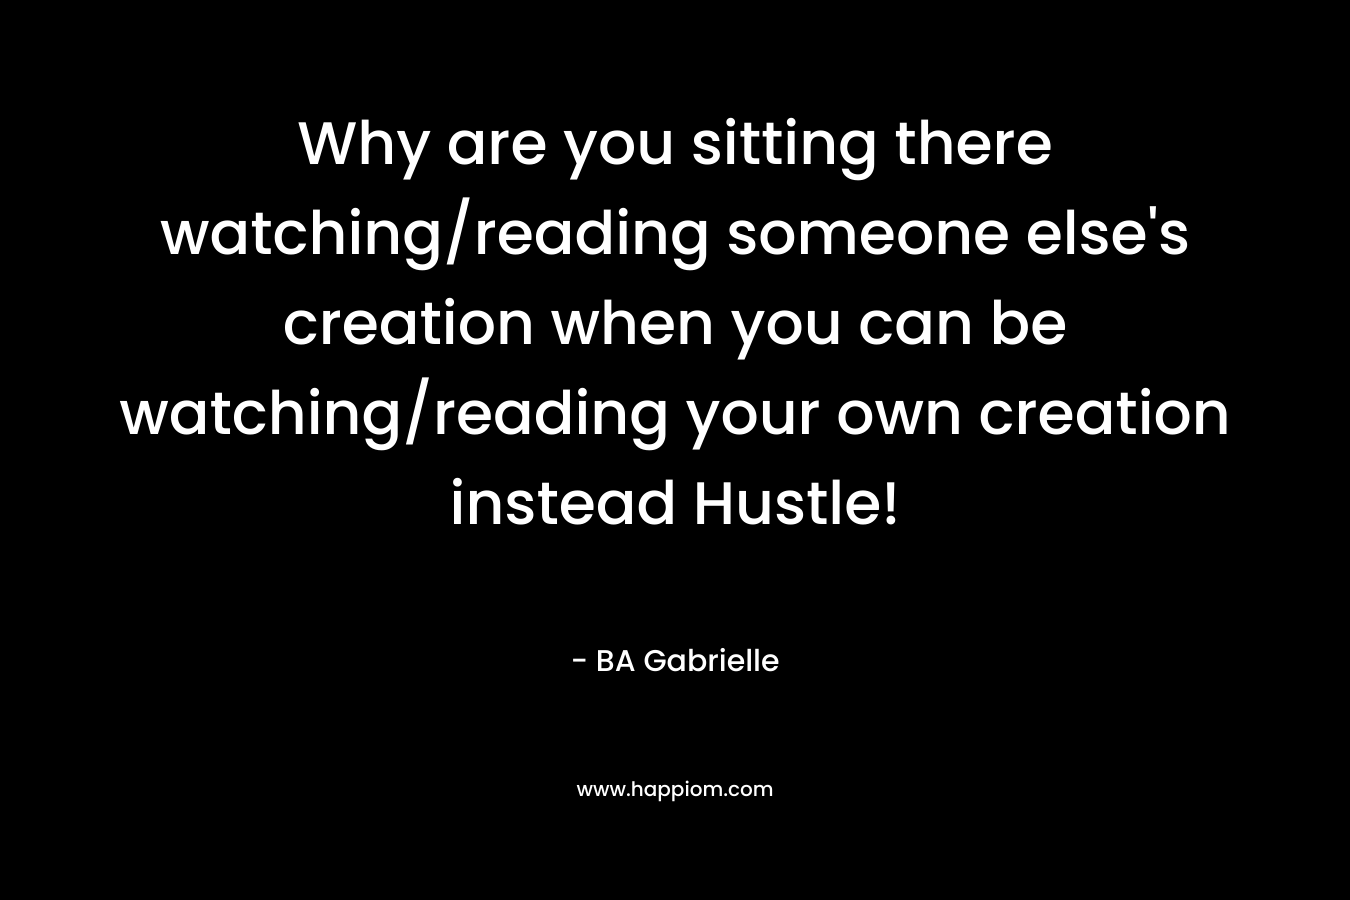 Why are you sitting there watching/reading someone else’s creation when you can be watching/reading your own creation instead Hustle! – BA Gabrielle